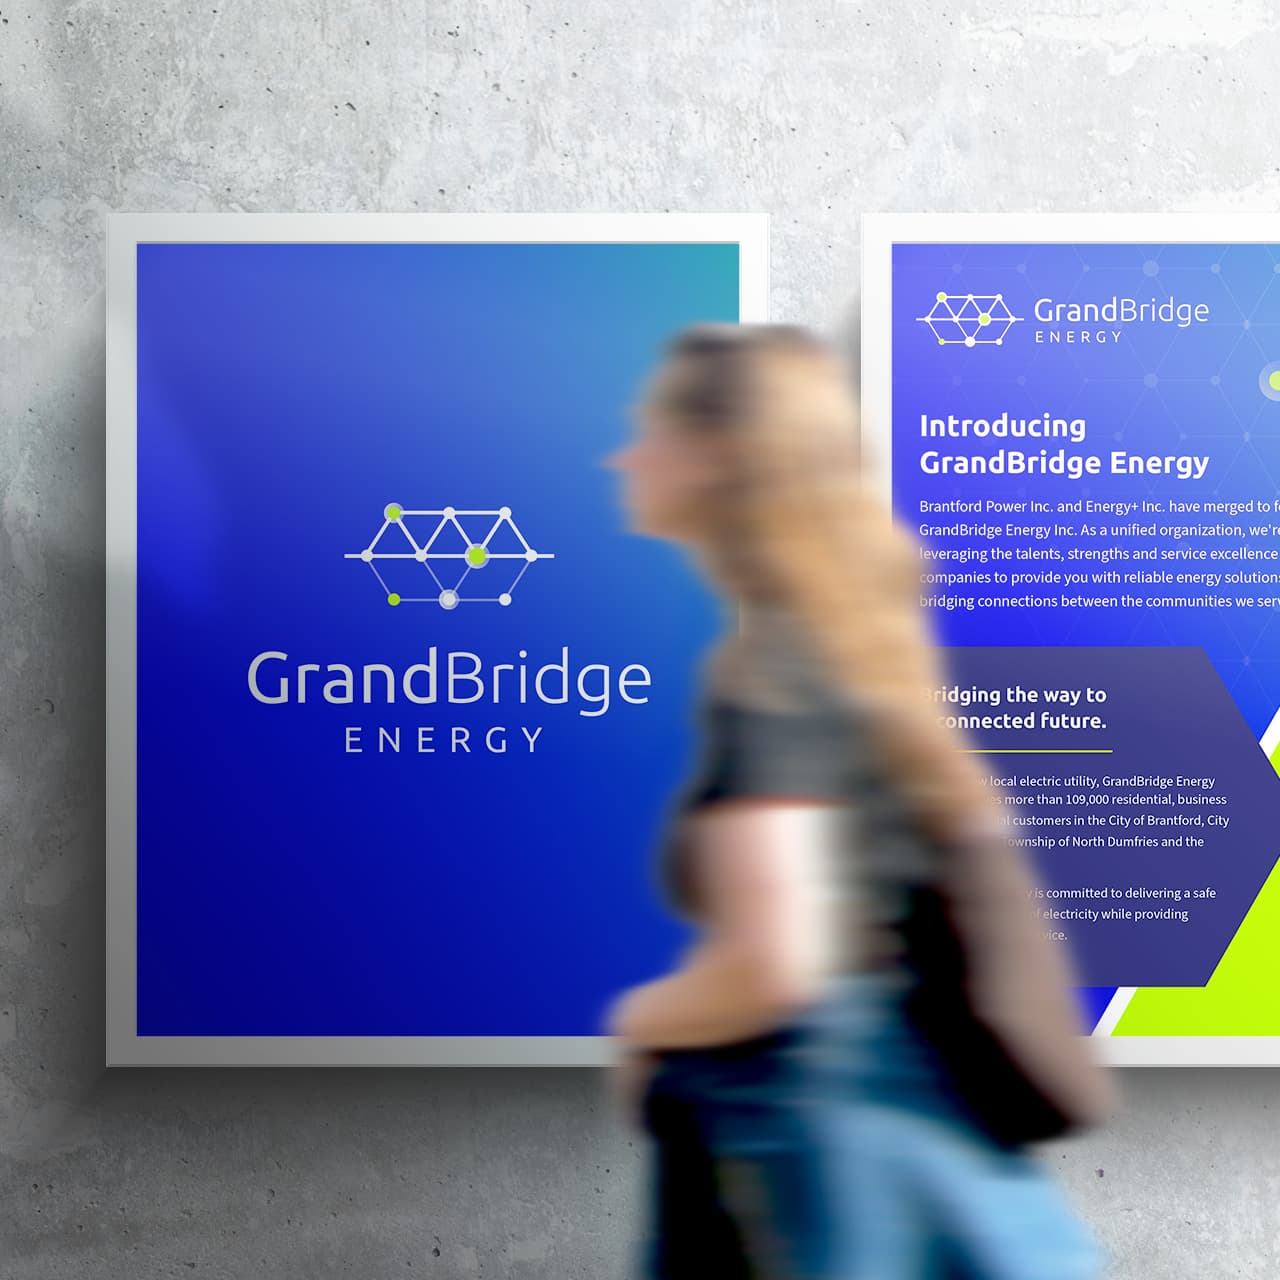 GrandBridge branded poster with a woman passing by